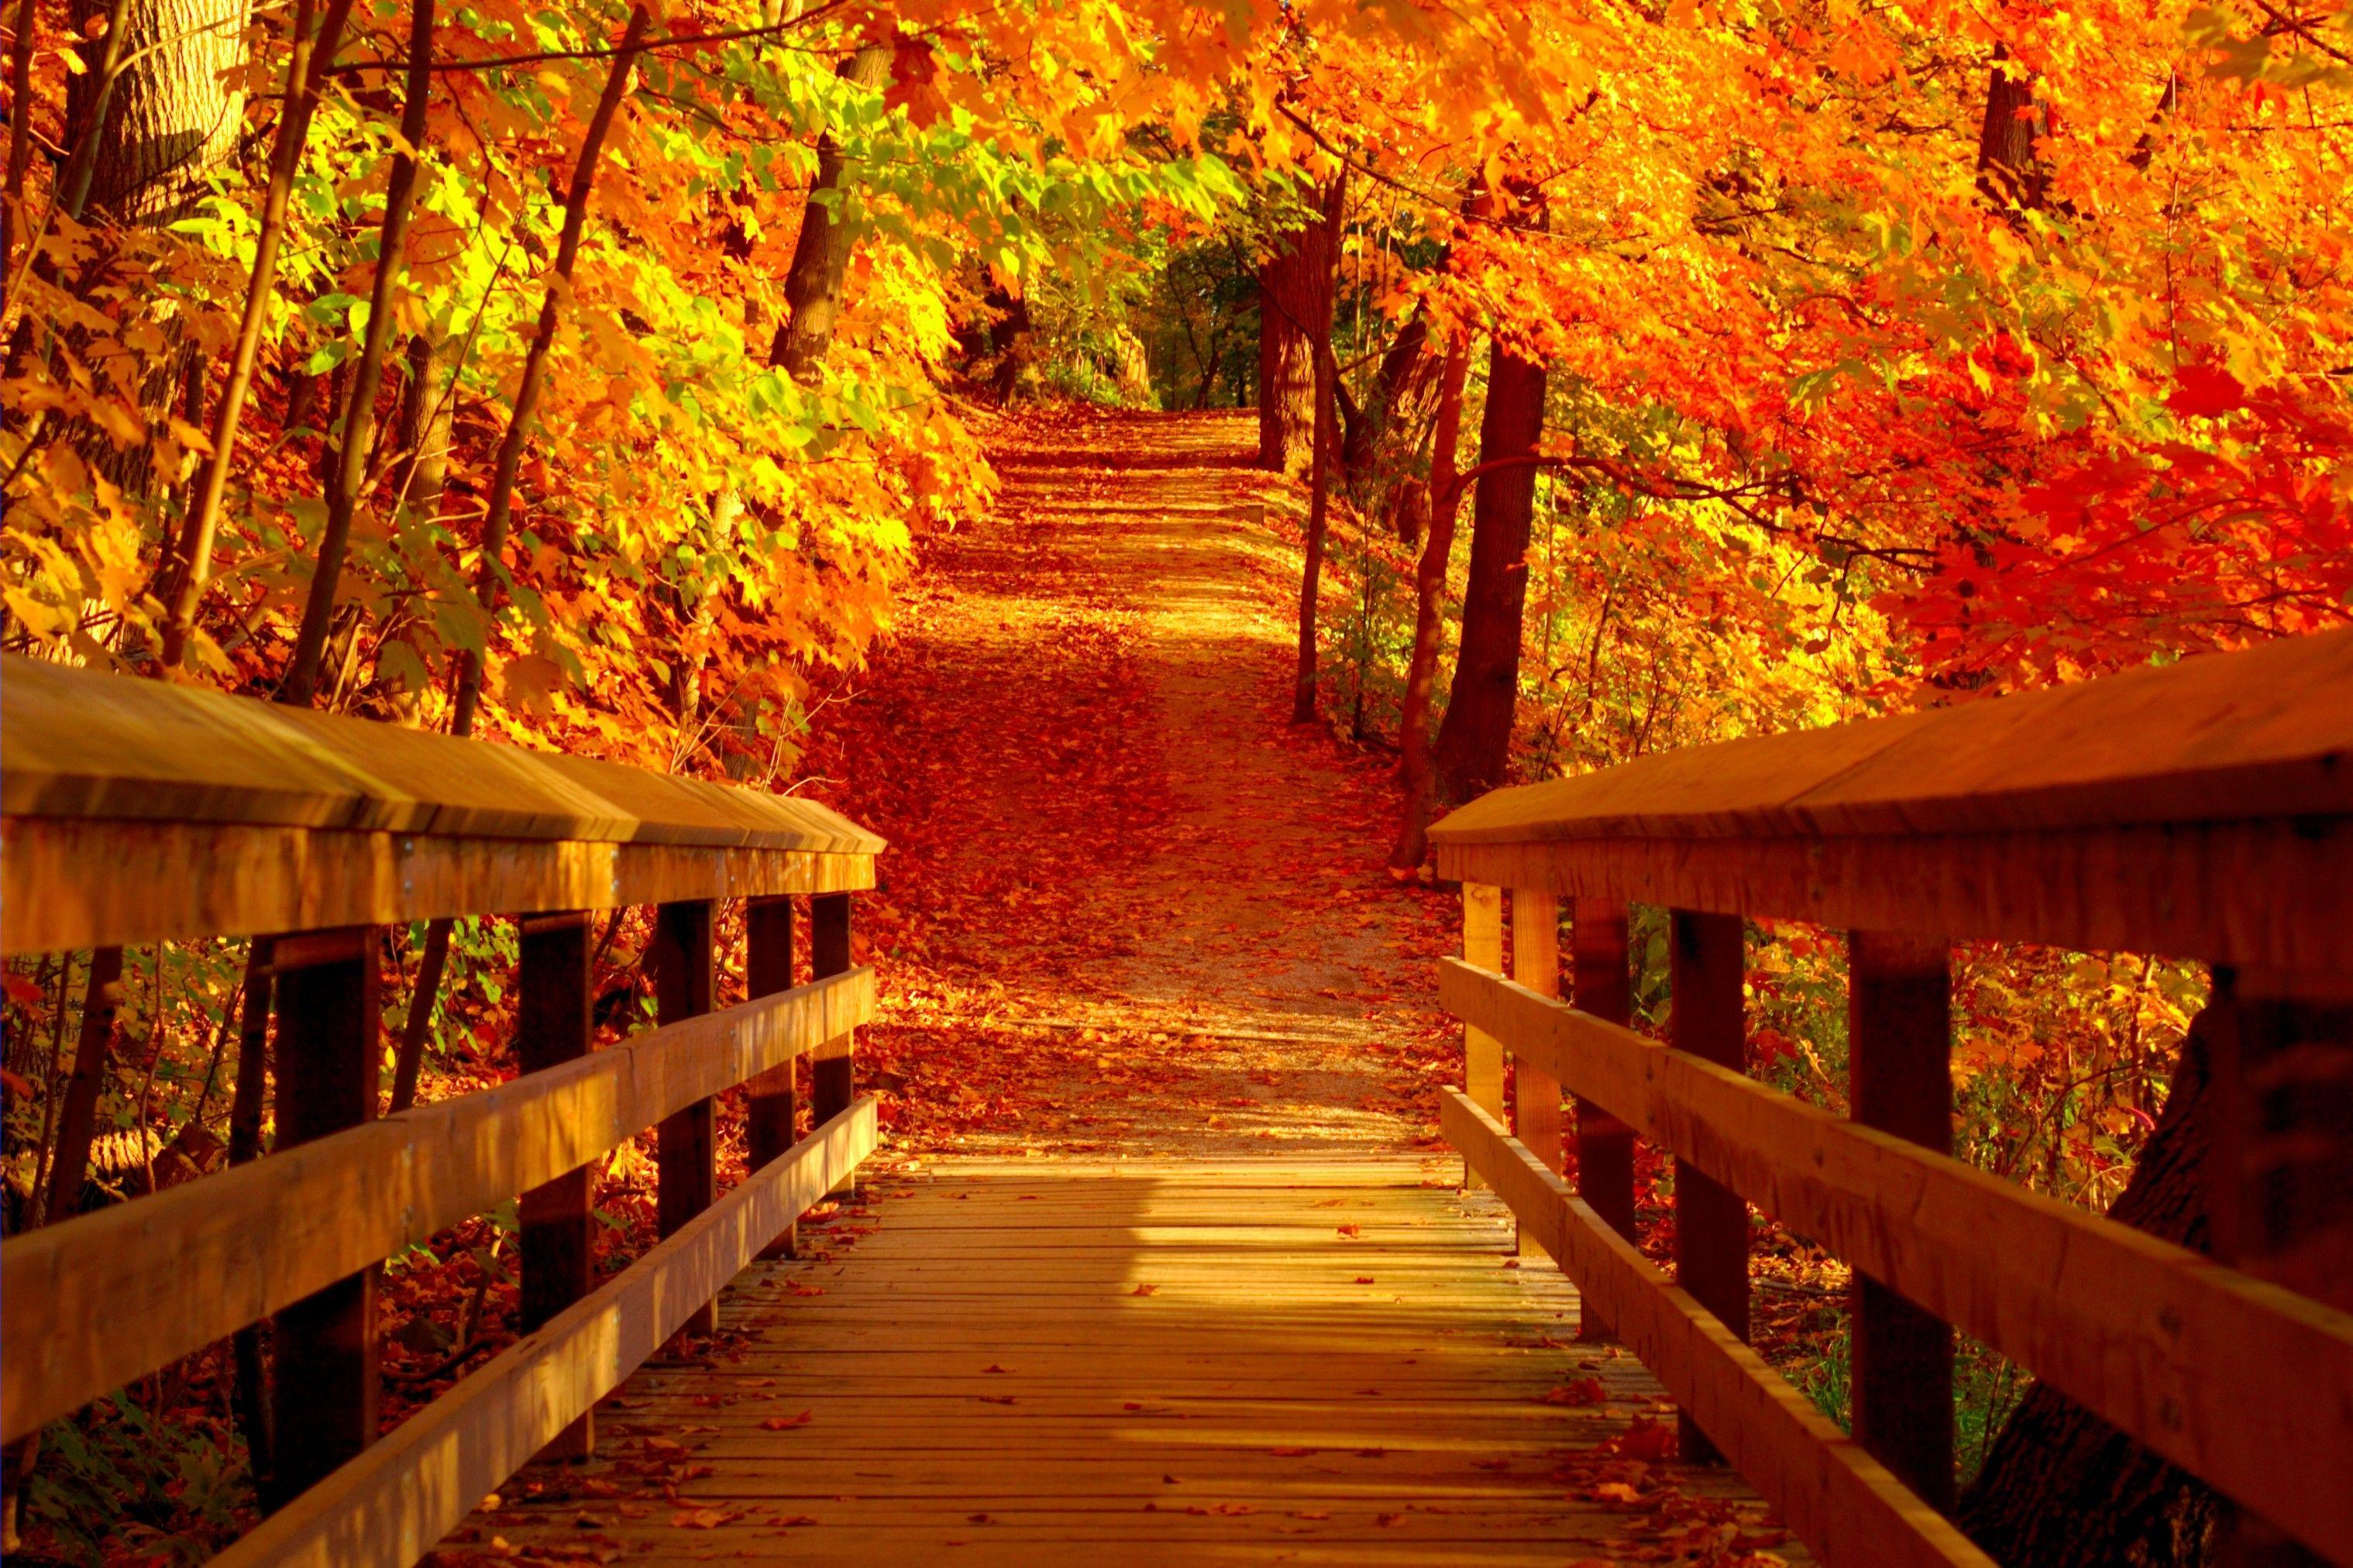  October Scenery Wallpapers Top Free October Scenery Backgrounds 